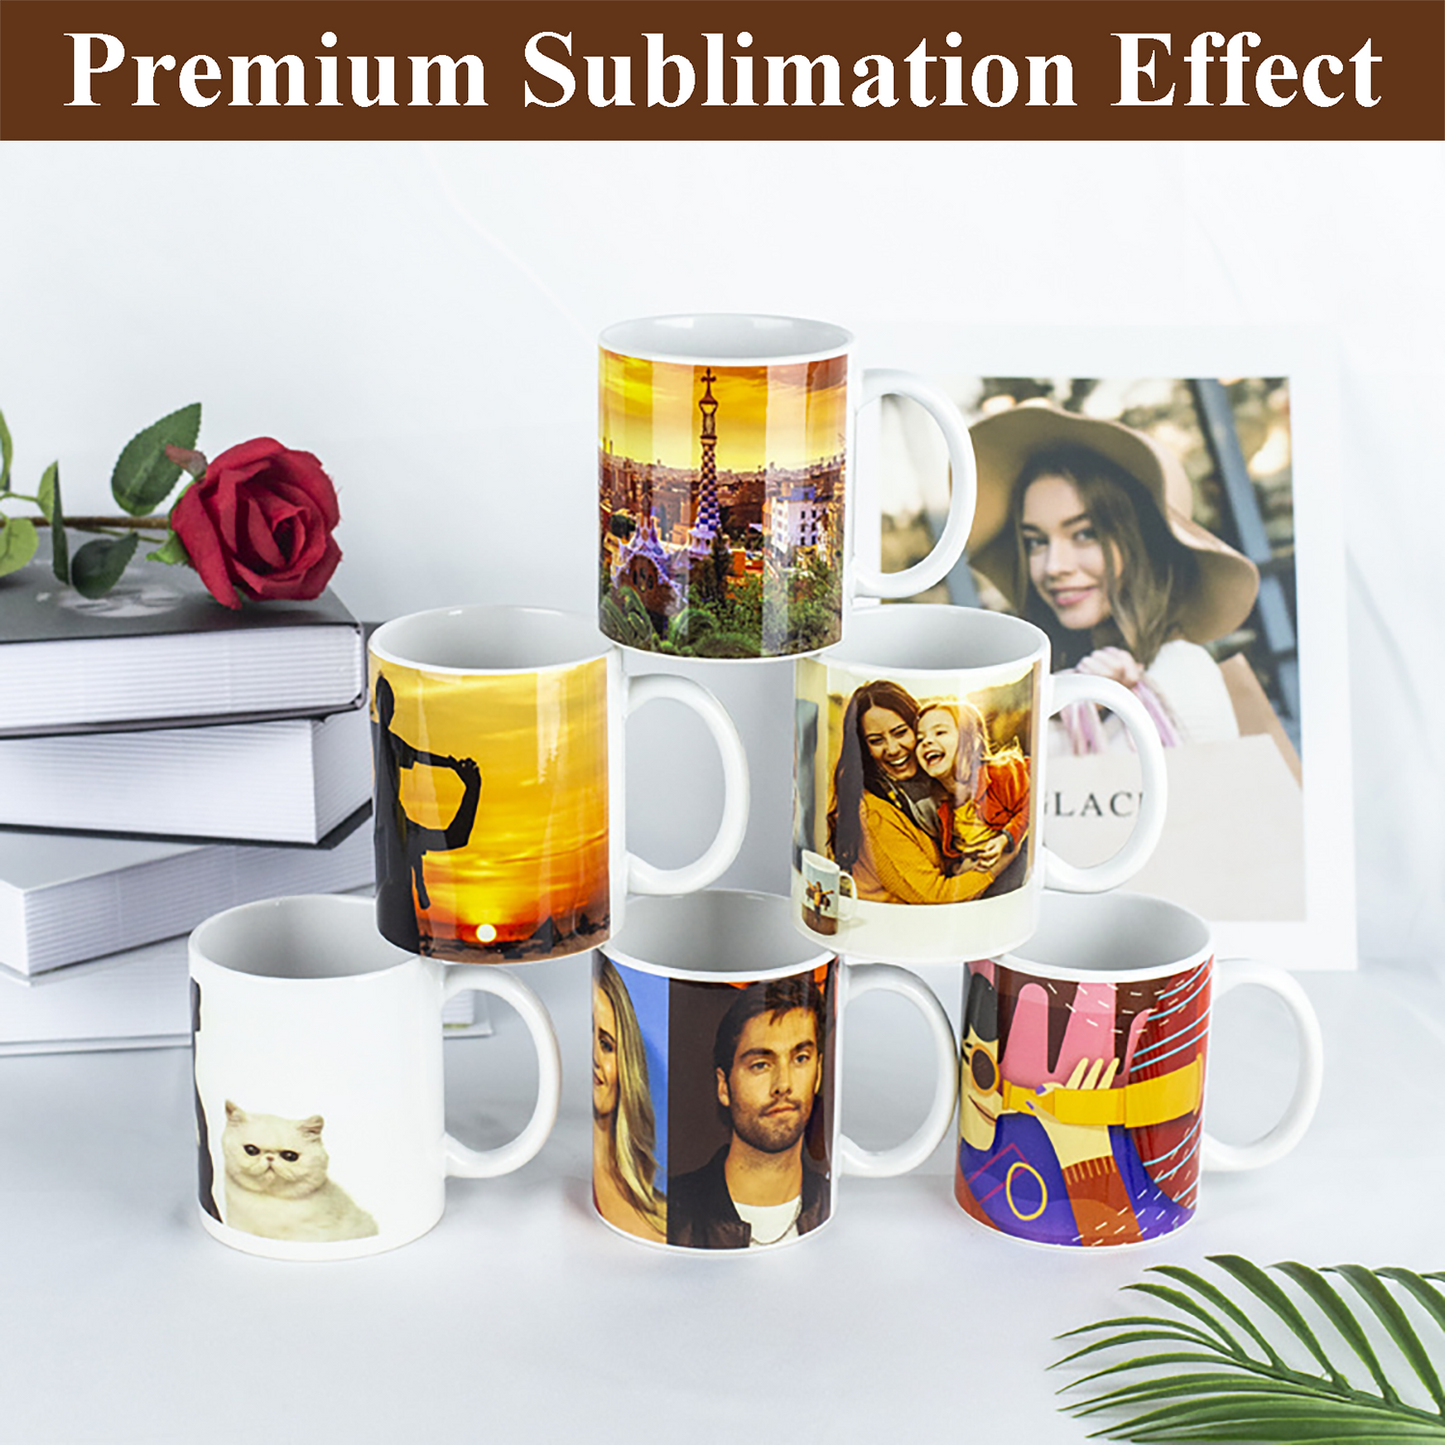 27Pack/36Pack Sublimation Mugs 15oz/11oz Blank White Coffee Cup